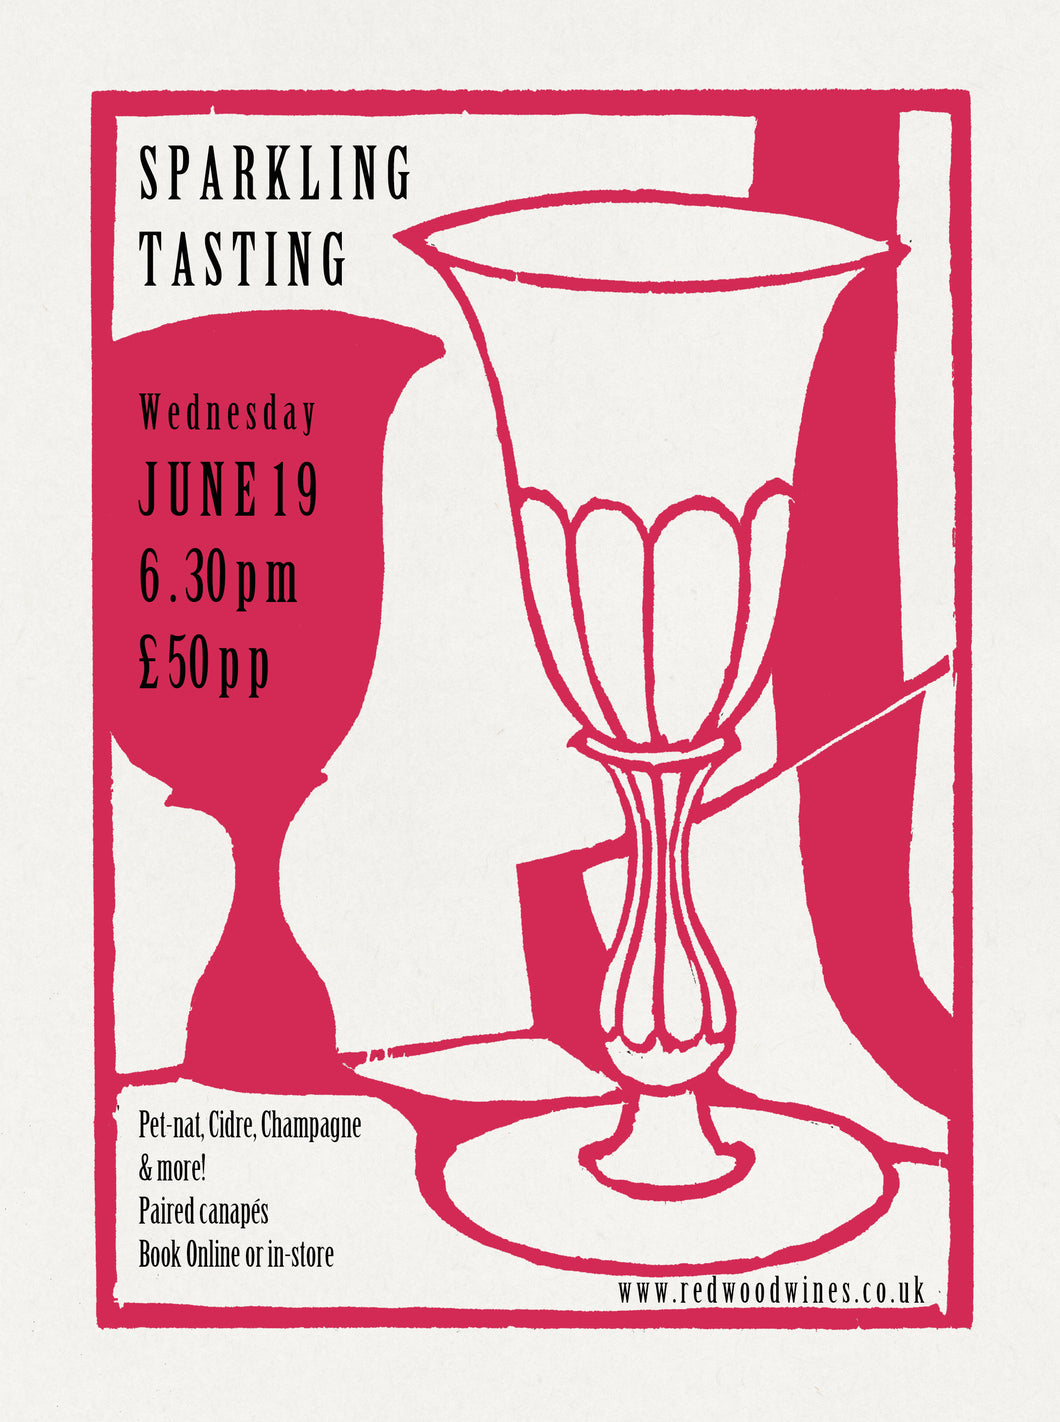 Sparkling Tasting - Wed 19th June 6.30pm